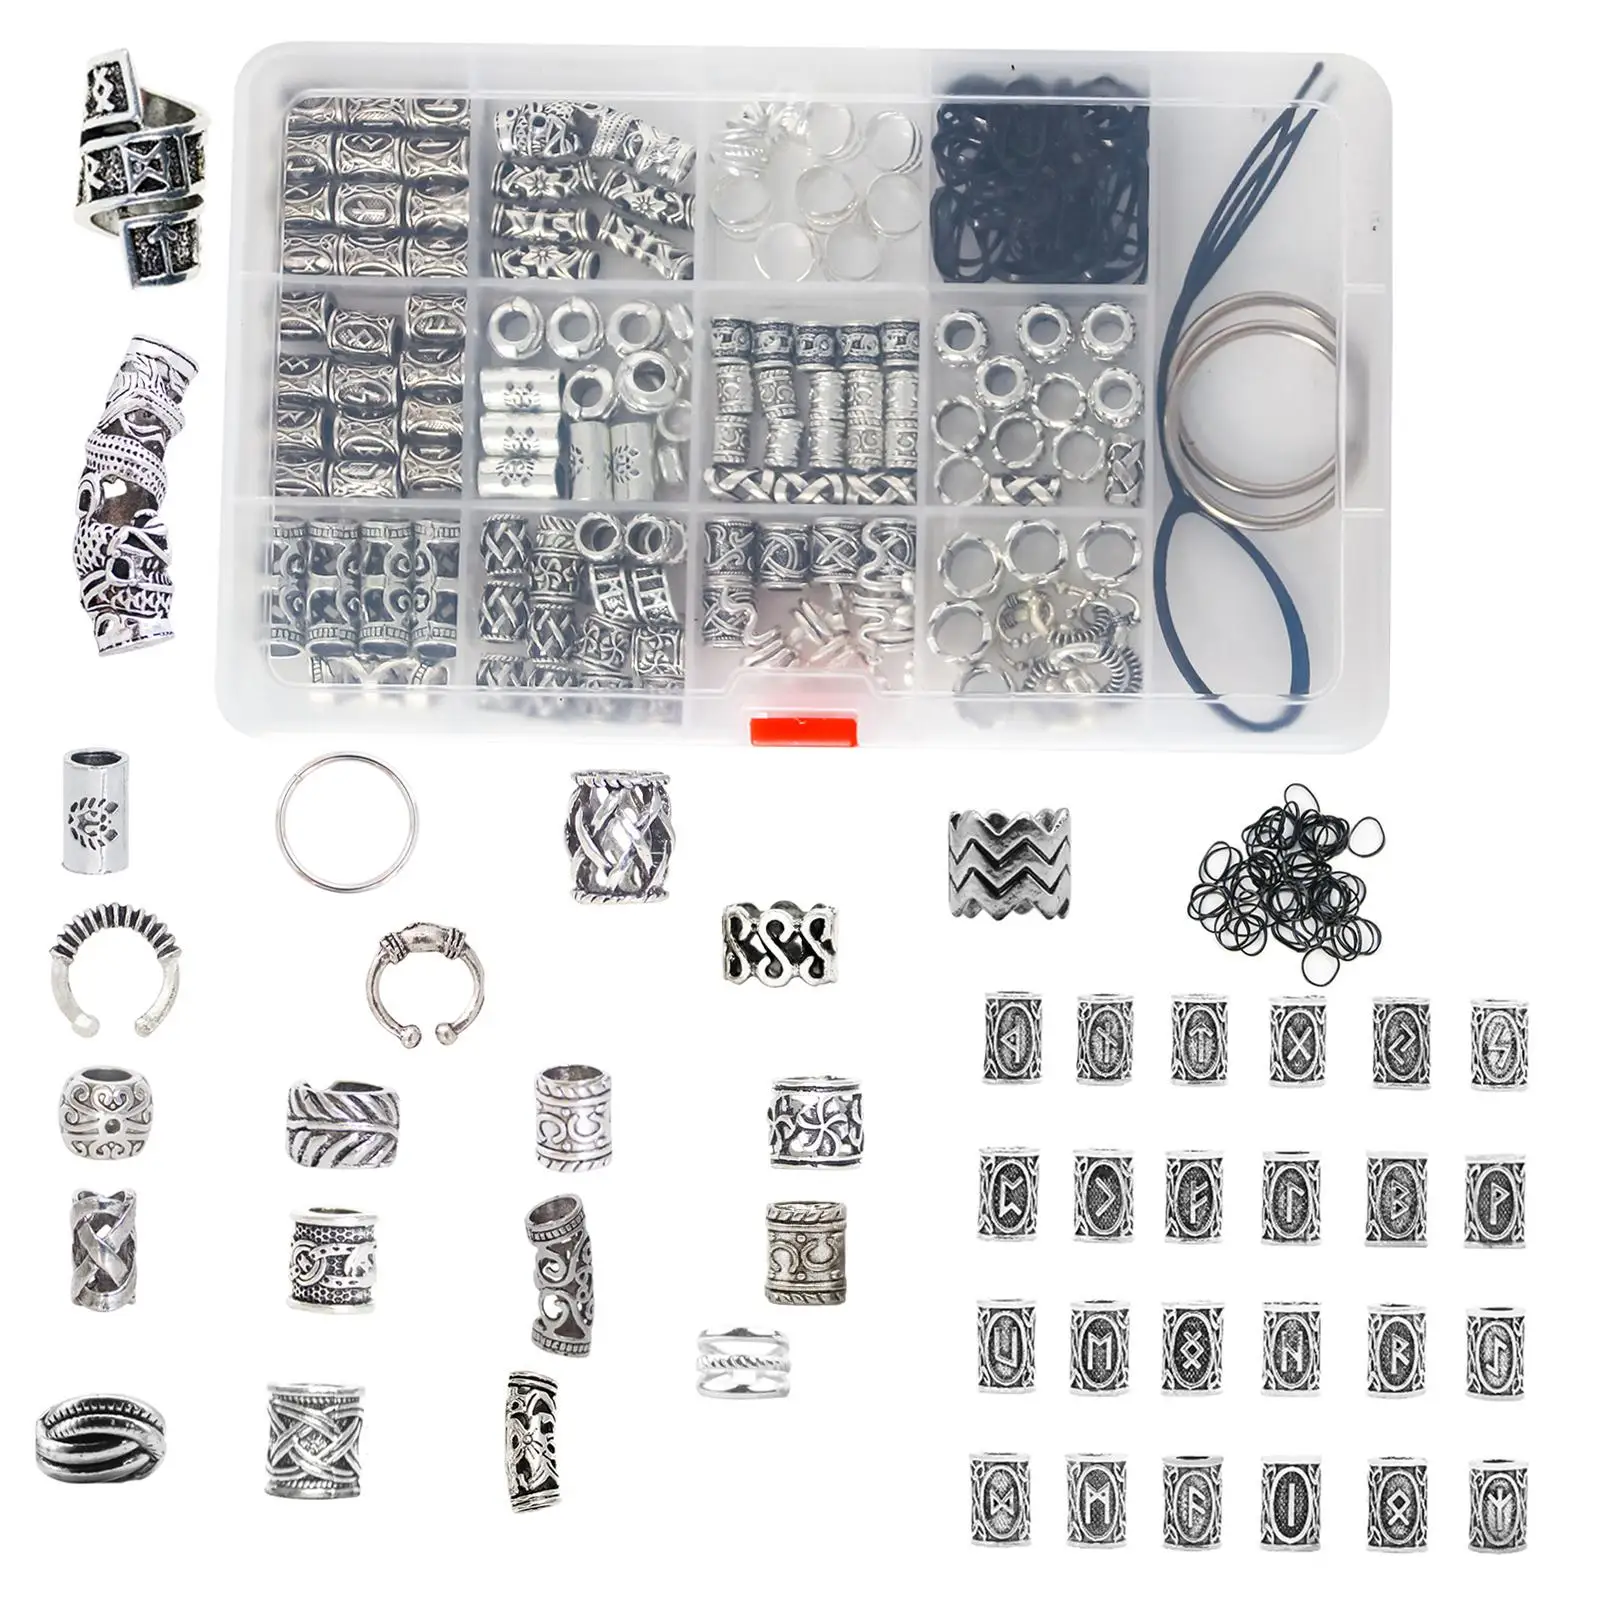 180 Pieces Mixed Dreadlocks Beads Tube Clips Pins Metal Cuffs Rings Accessories Decoration Hair Braiding Vintage Silver